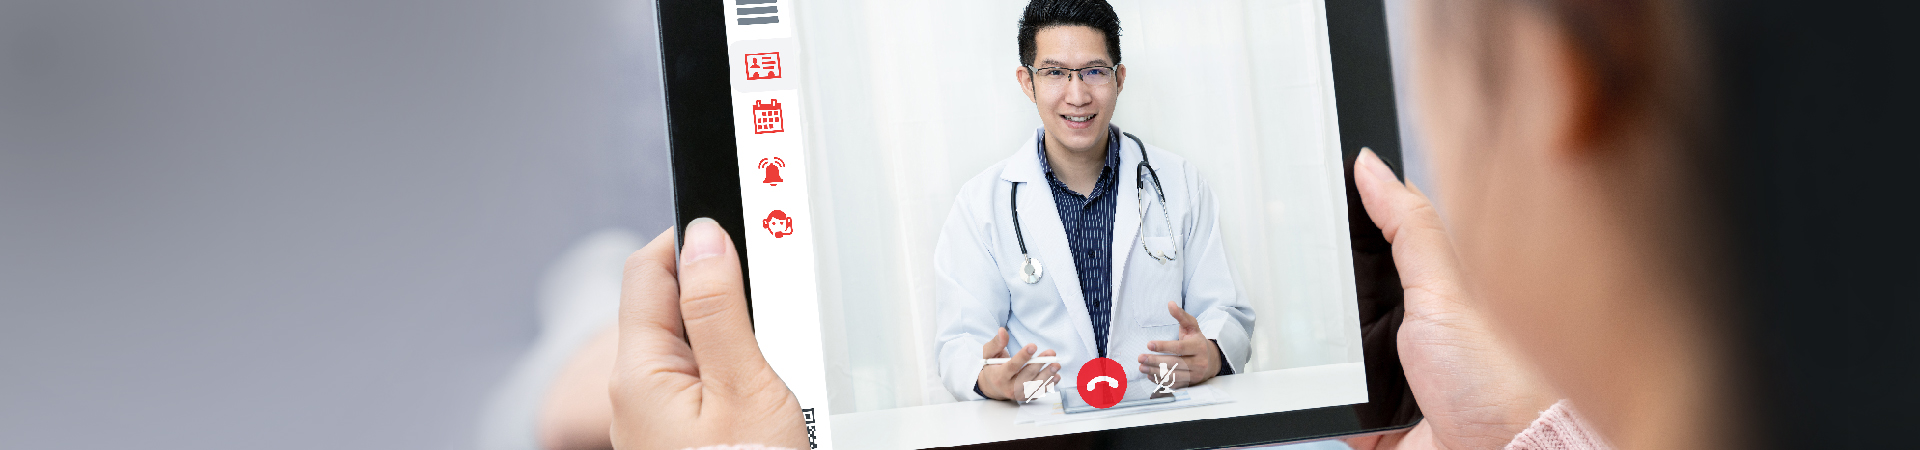 Telehealth Software Design and Development for Primary Care Practices